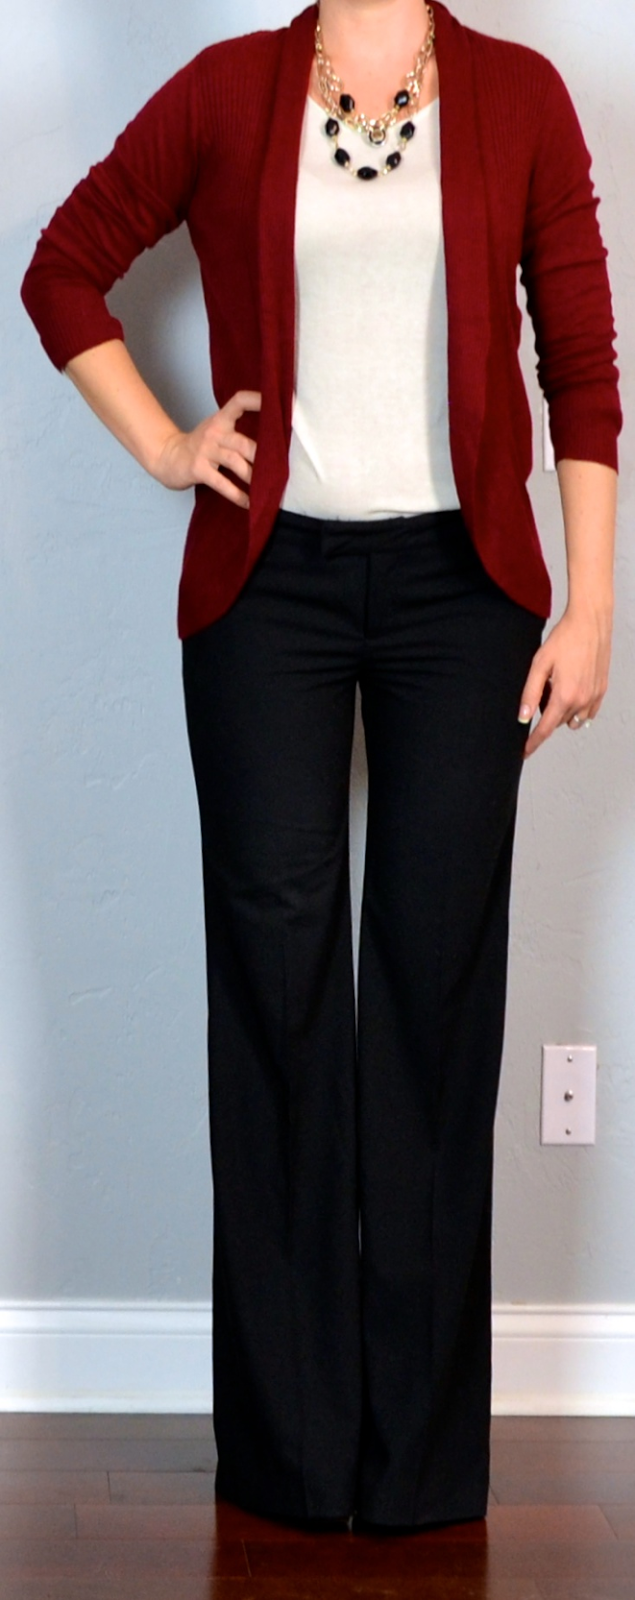 Outfit Posts: outfit post: burgundy/maroon cardigan, cream shirt, black ...